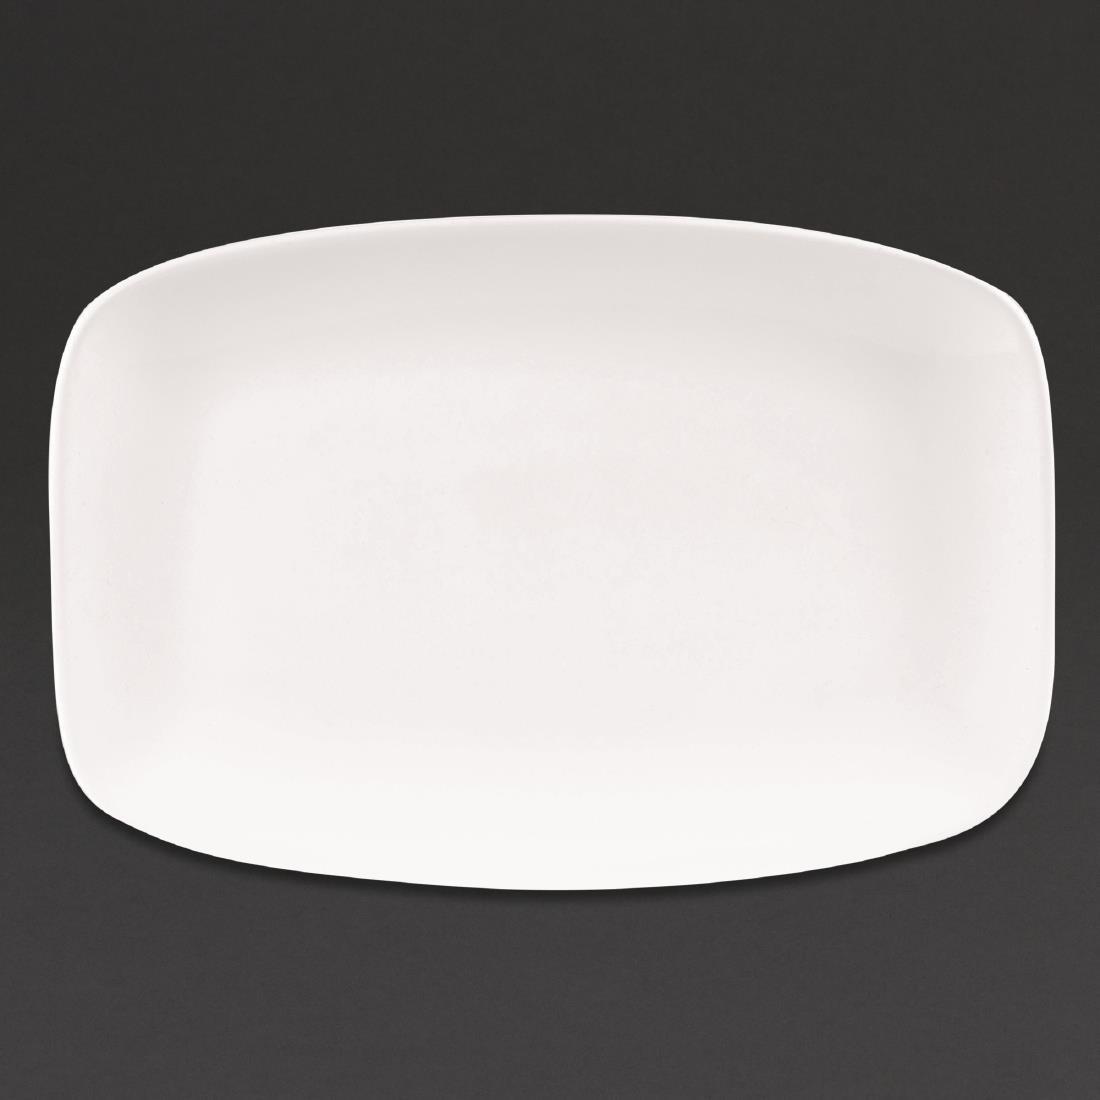 Churchill X Squared Oblong Plates White 199 x 300mm (Pack of 6) - DW340  - 1